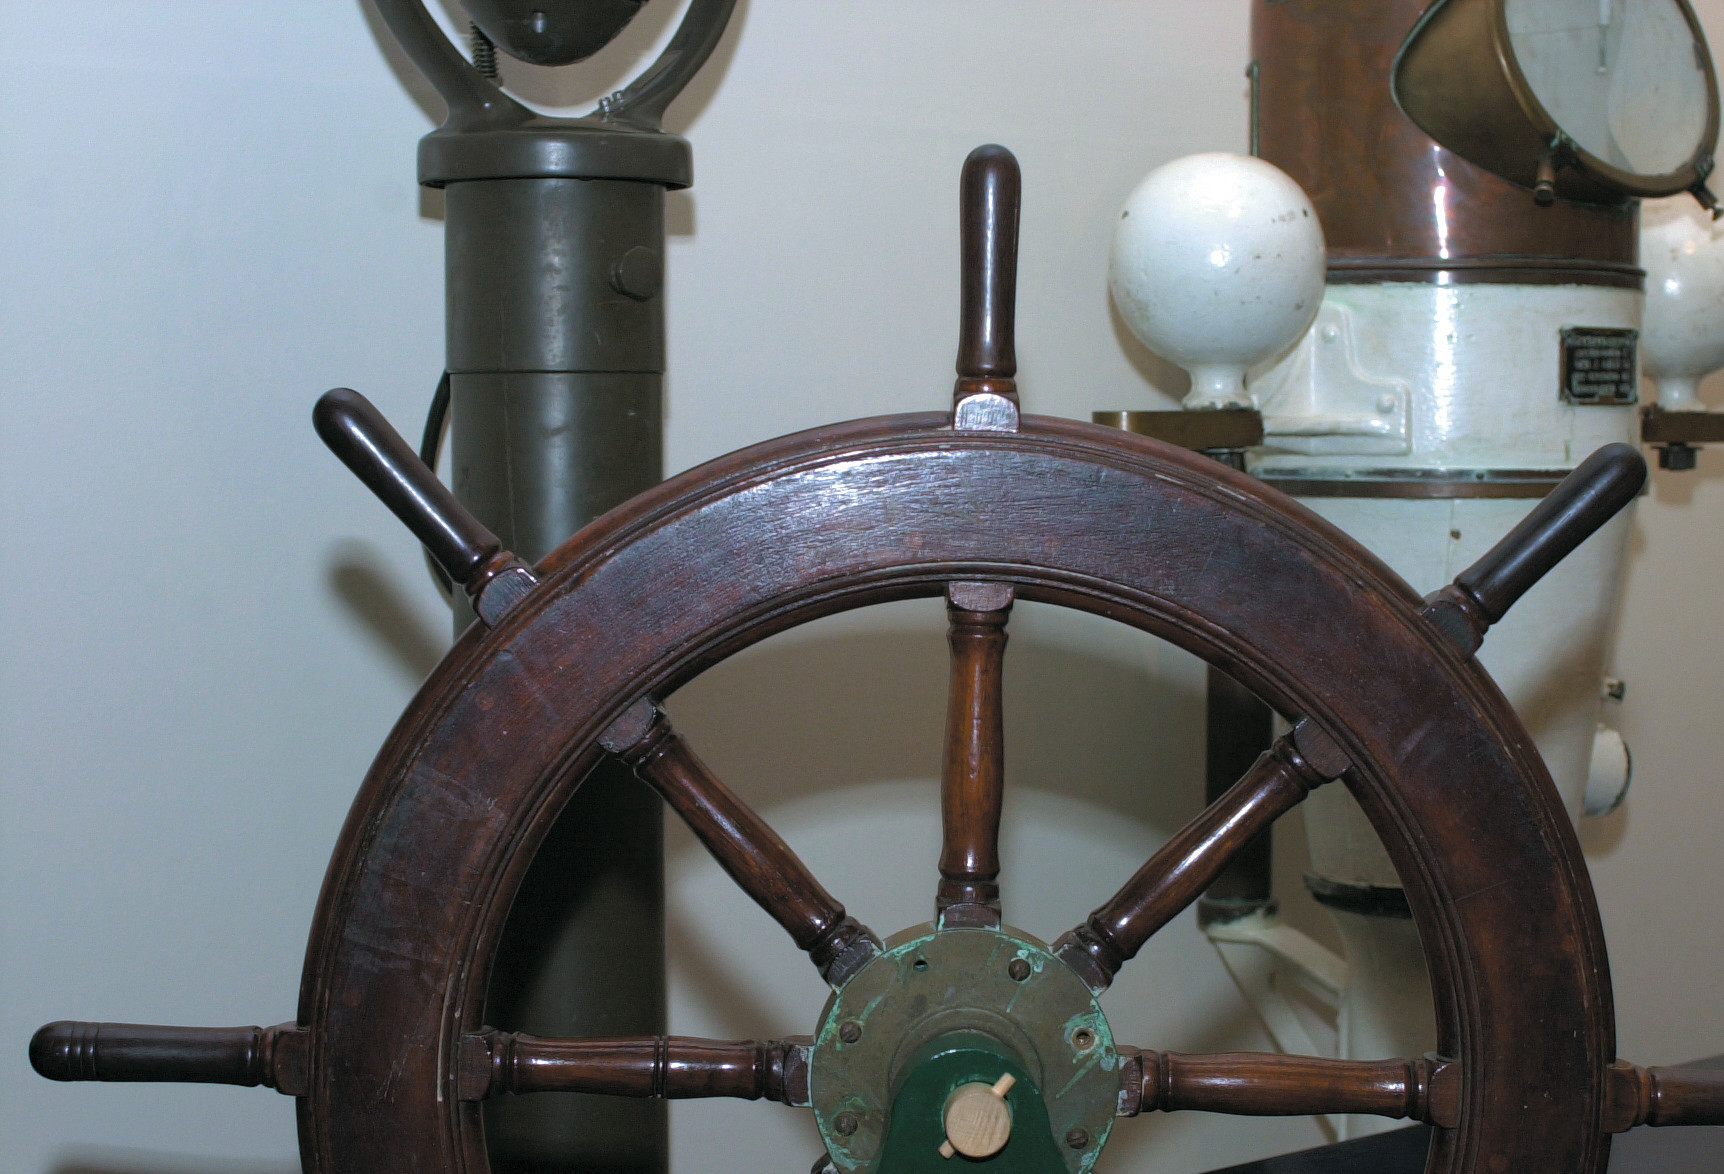 The collection also contains ship’s wheels from various cutters.